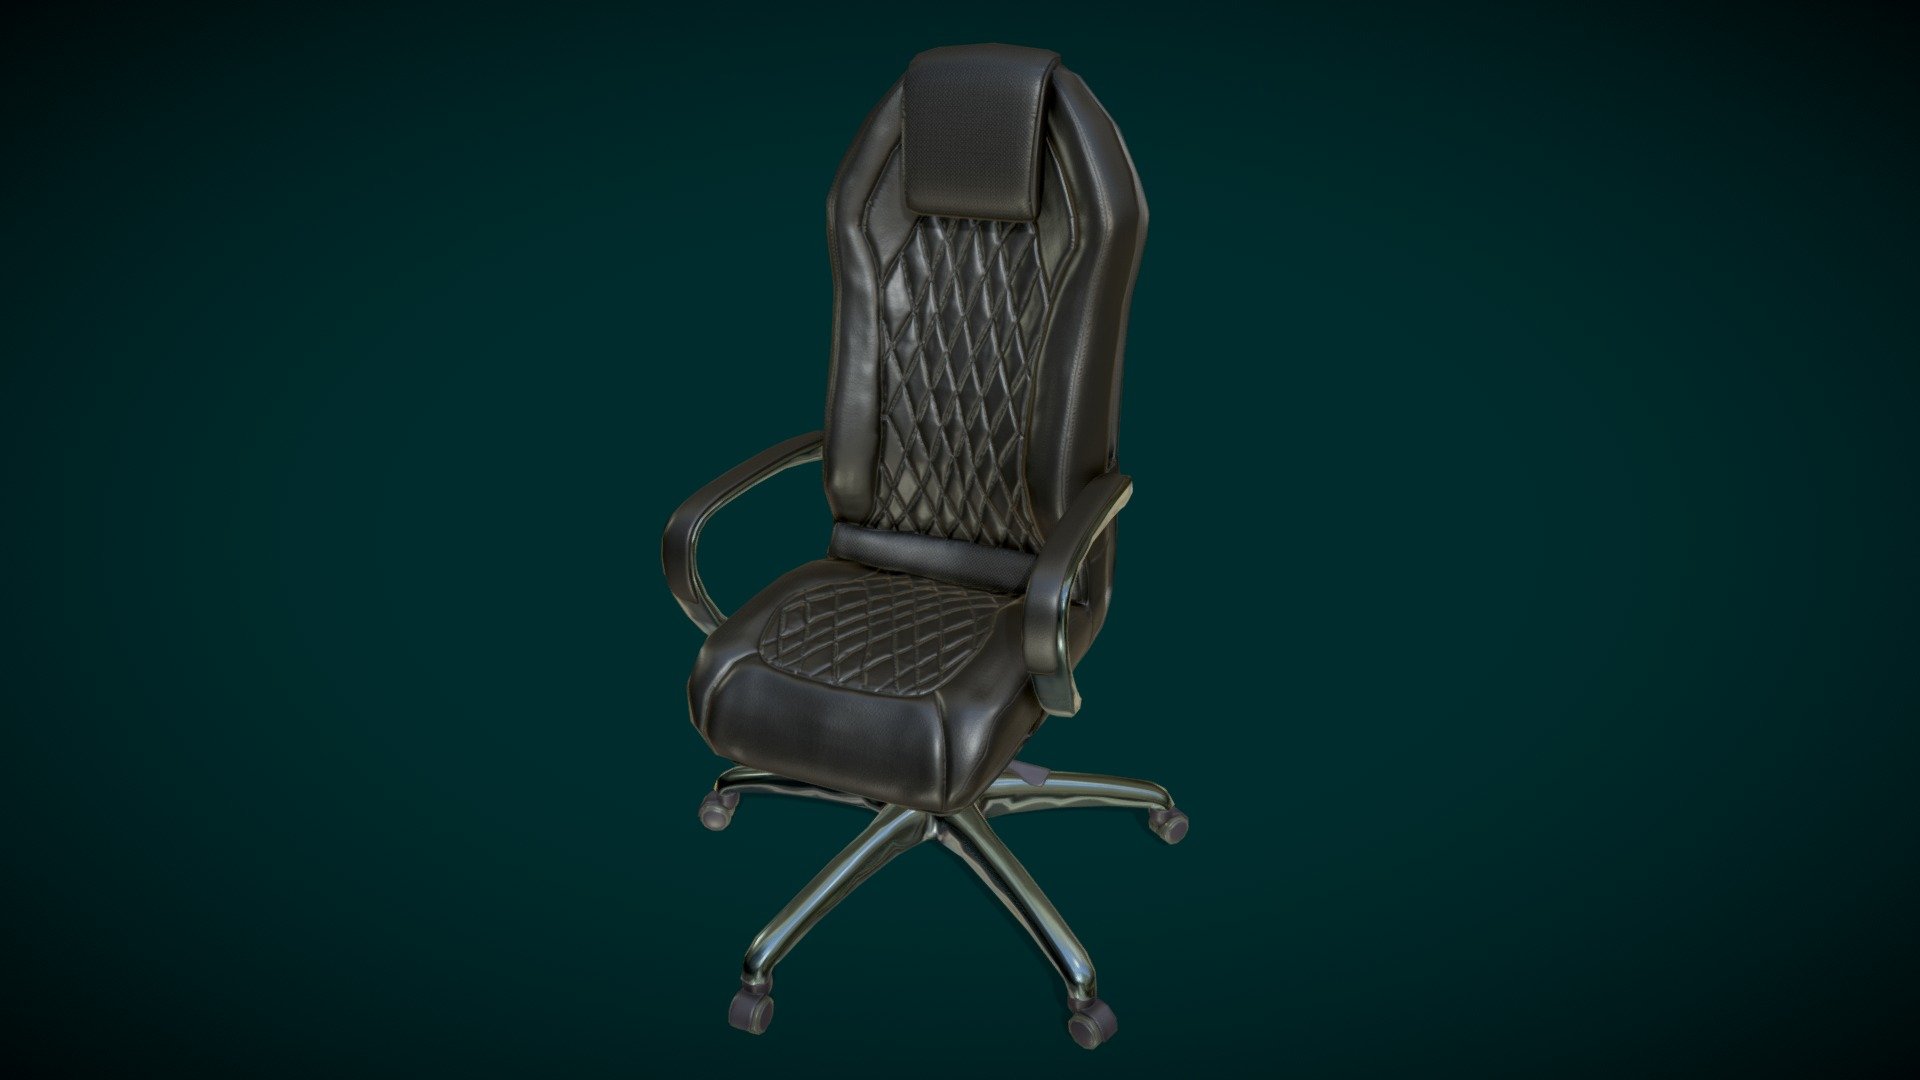 Office chair, the reference is the &ldquo;Bureaukrat